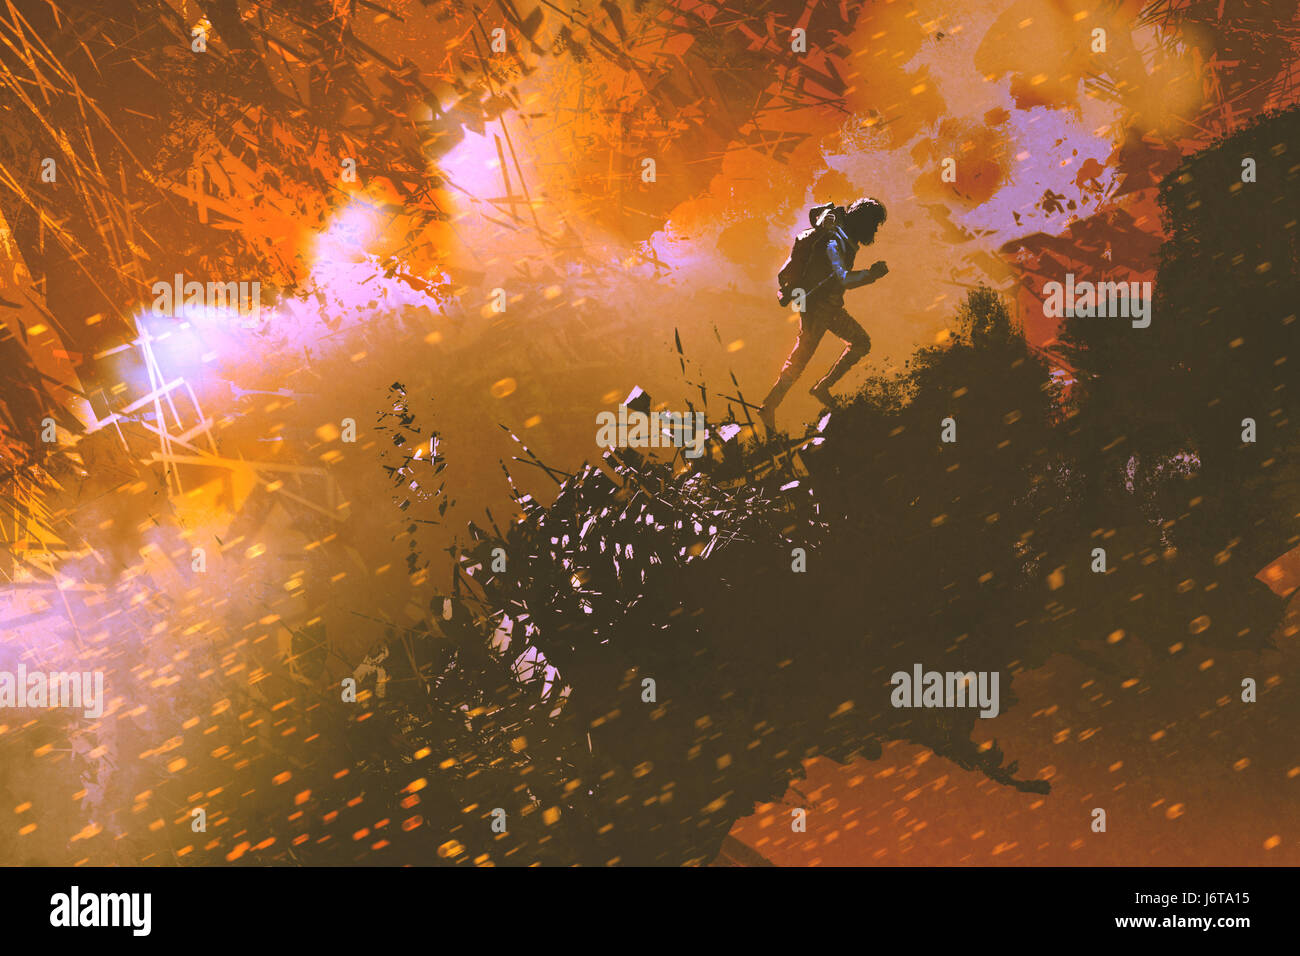 digital art of the hiker walking in the mountain with explosion effect, illustration painting Stock Photo